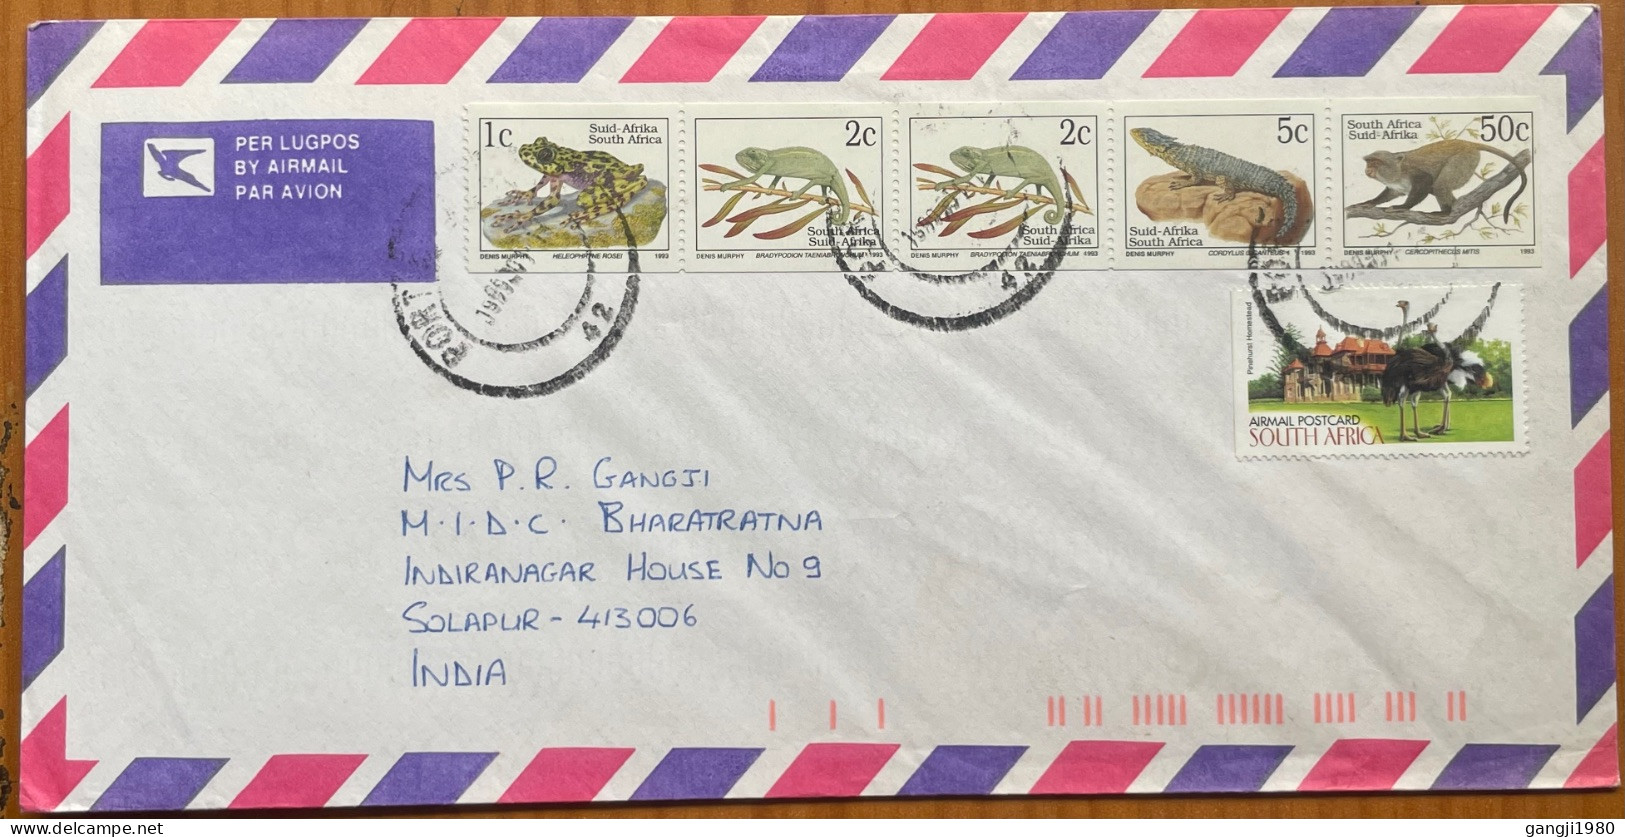 SOUTH AFRICA 1993, COVER USED TO INDIA, BOOKLET PANE, REPTILE, MONKEY, ANIMAL, BIRD, BUILDING, 6 STAMP, PORT ELIZABETH - Storia Postale